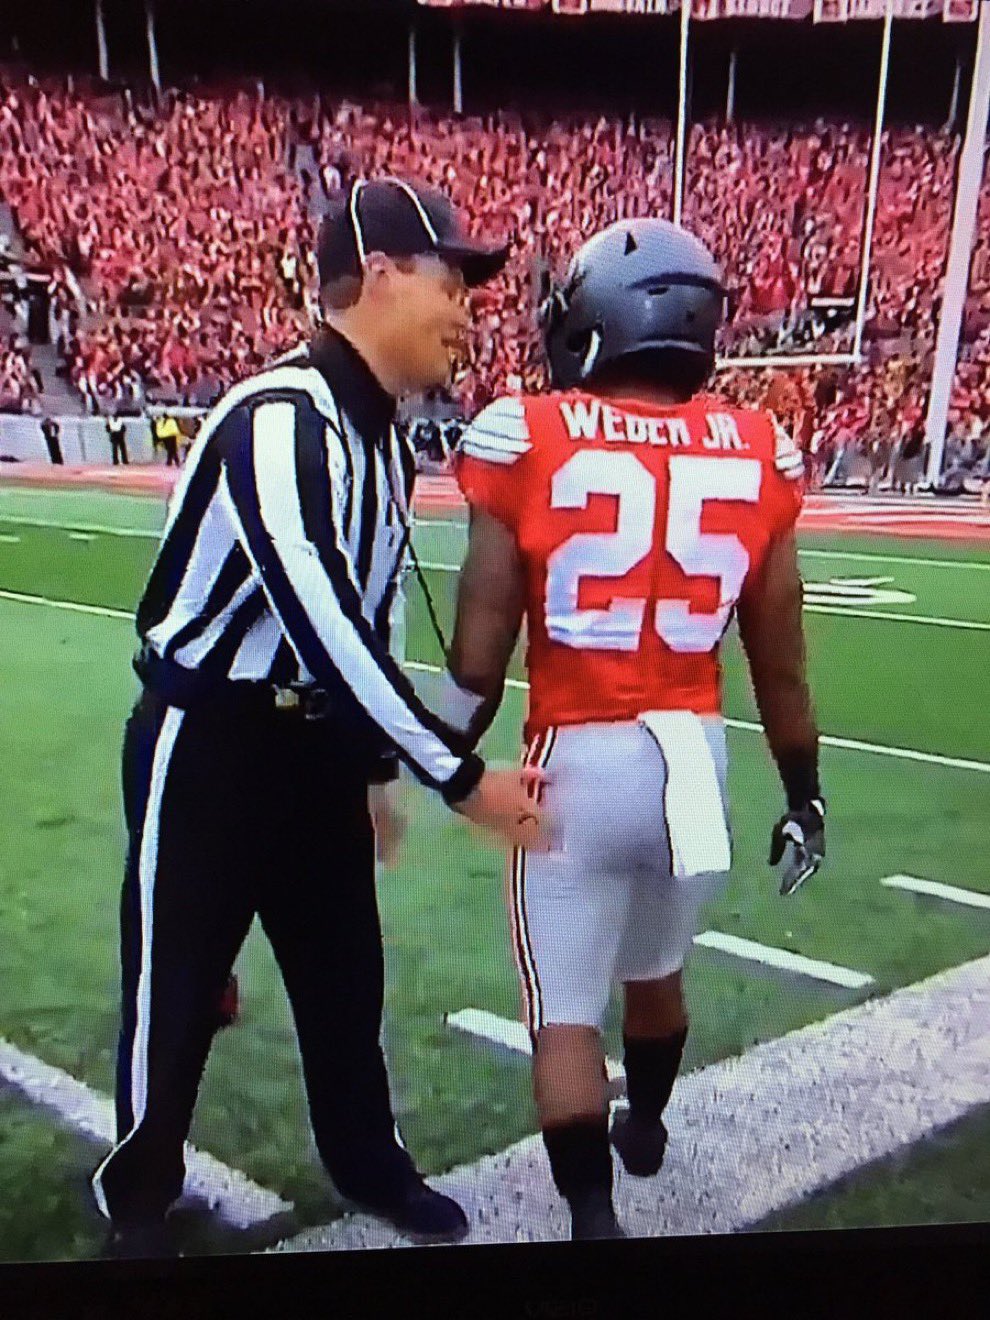 HUGE on X: "This is the Ohio State fanboy ref working the Ohio State at  Michigan football game Saturday in Ann Arbor. Love the photo from his  unbiased work in that classic